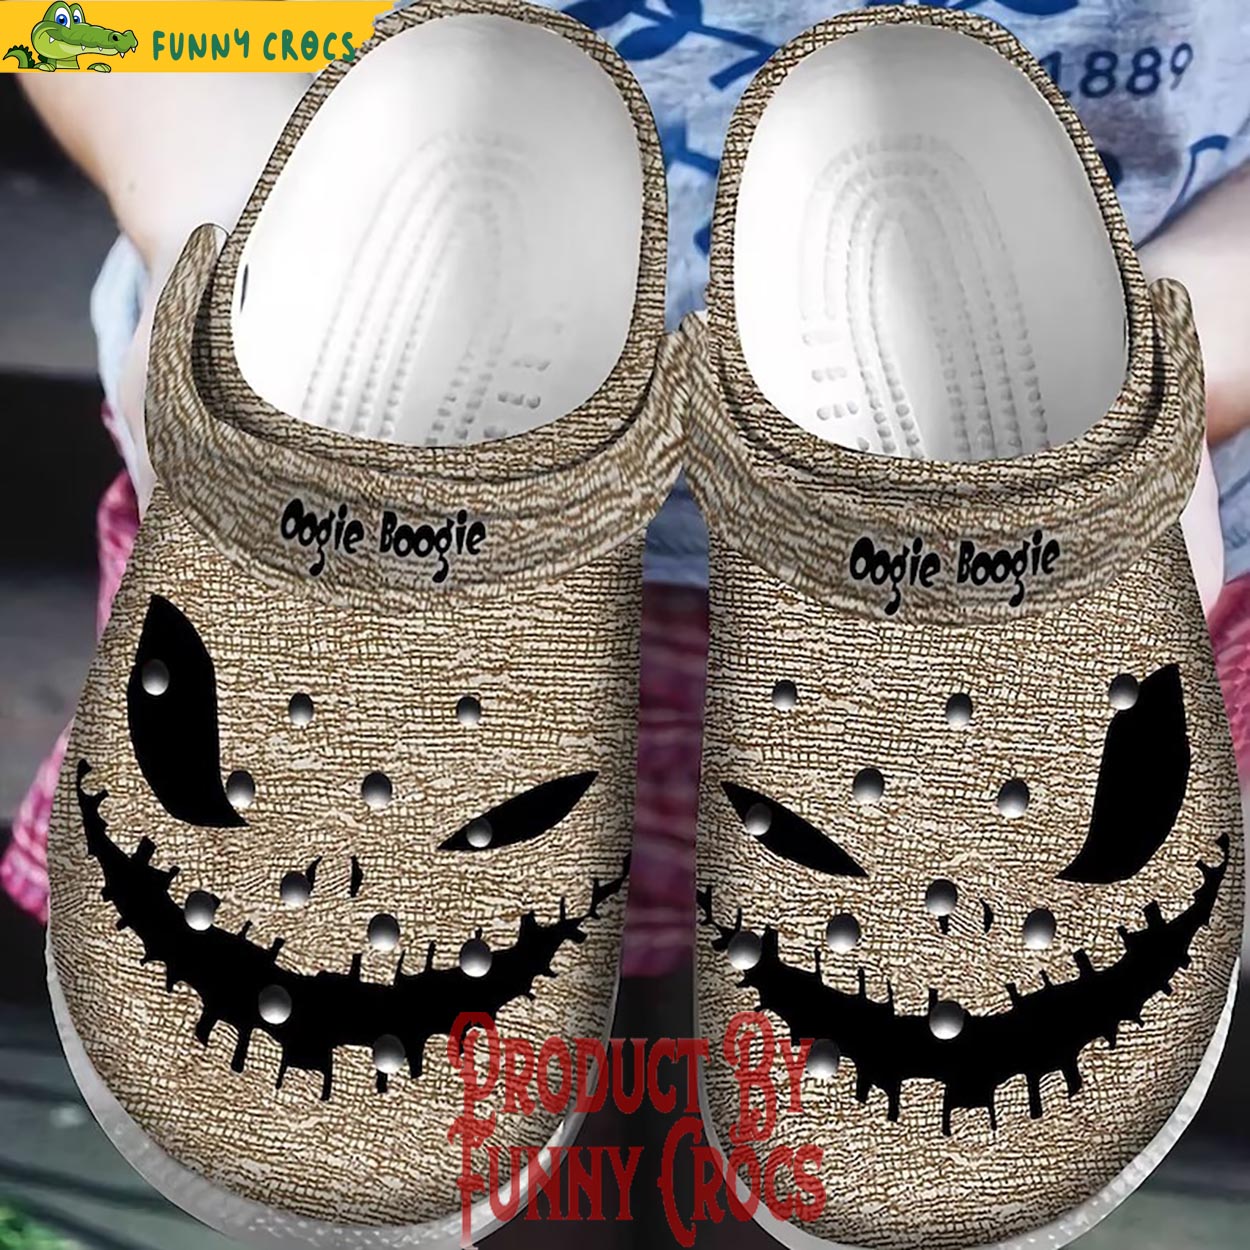 Face Oogie Boogie Crocs Clogs – Discover Comfort And Style Clog Shoes